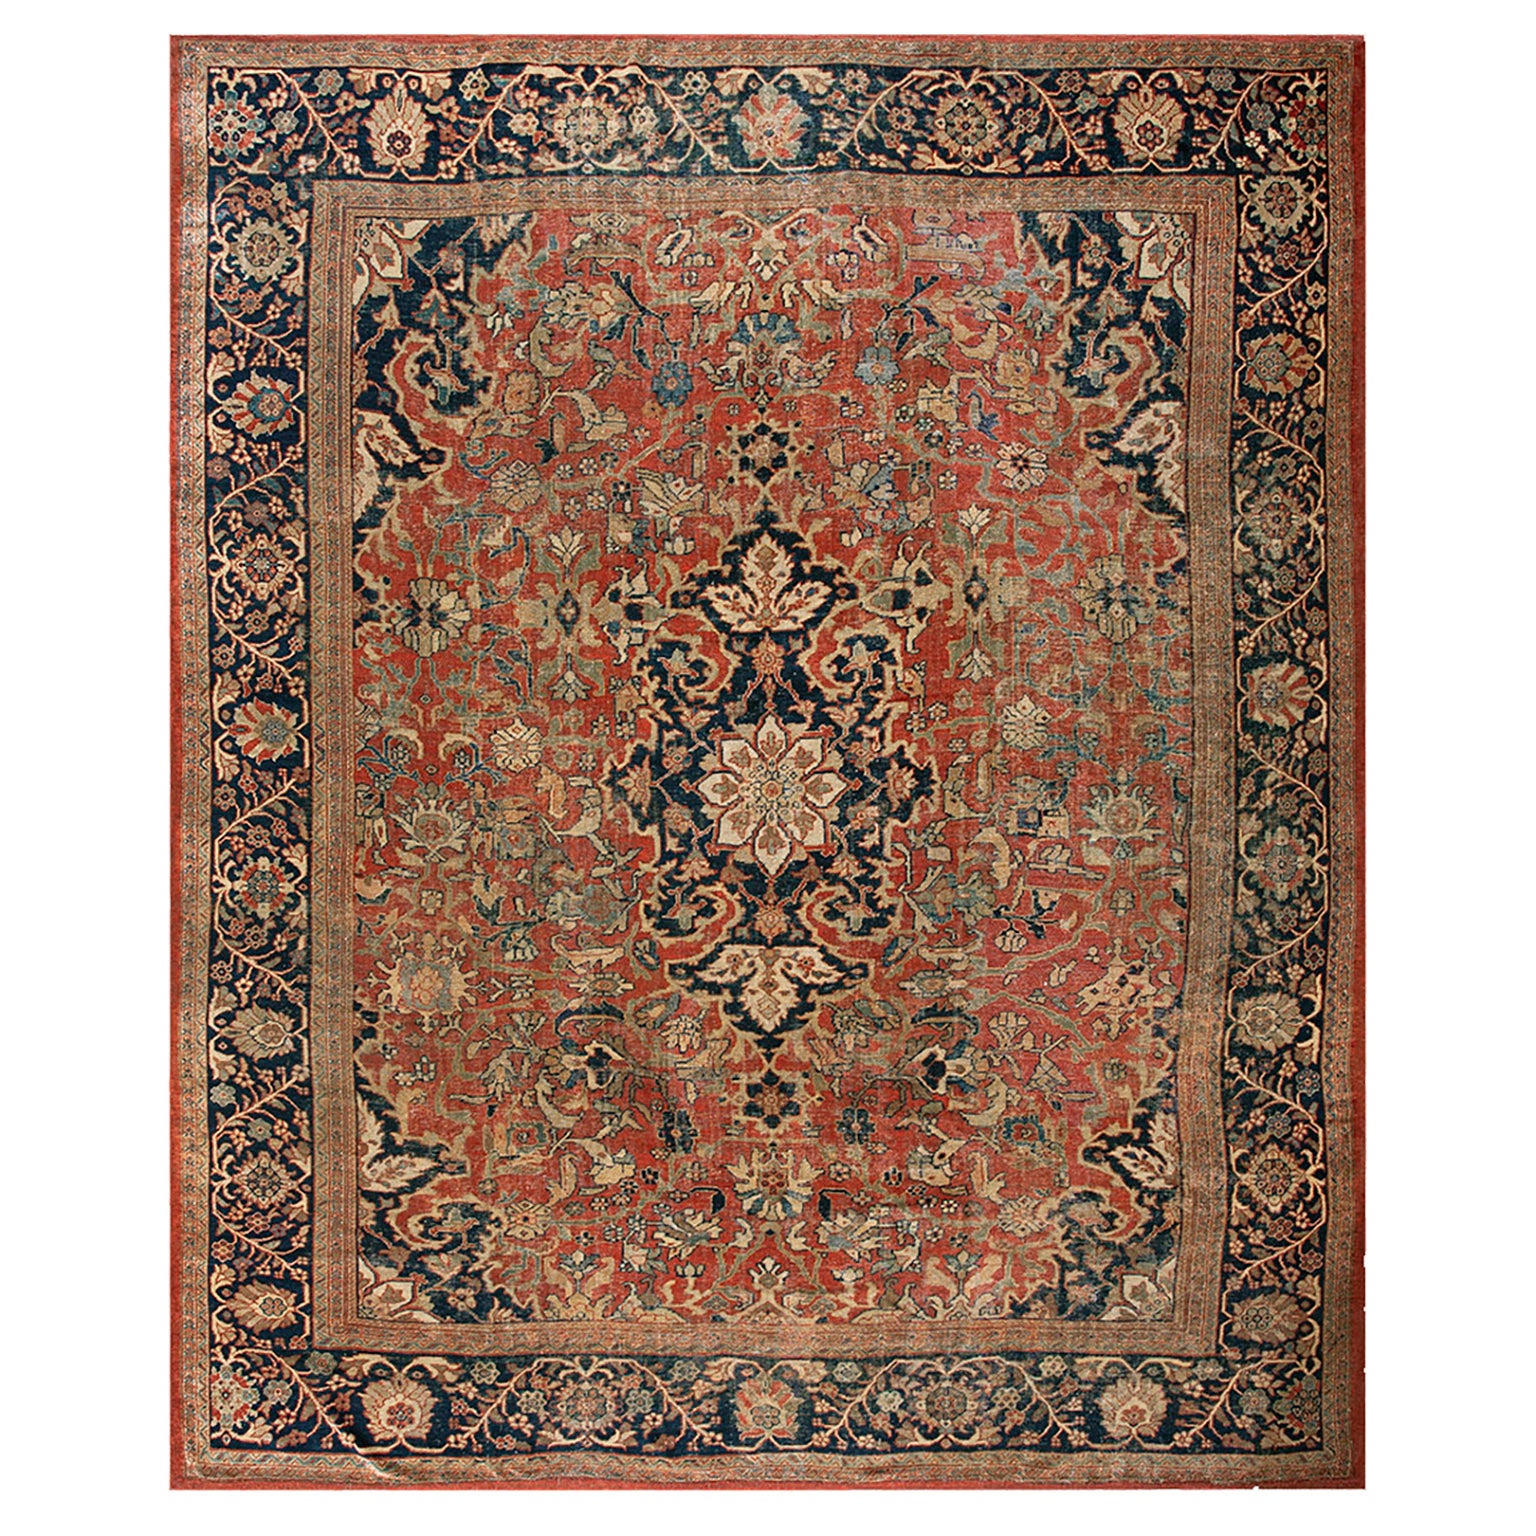 Late 19th Century Persian Sultanabad Carpet ( 10'9" x 13'8" - 328 x 417 ) For Sale